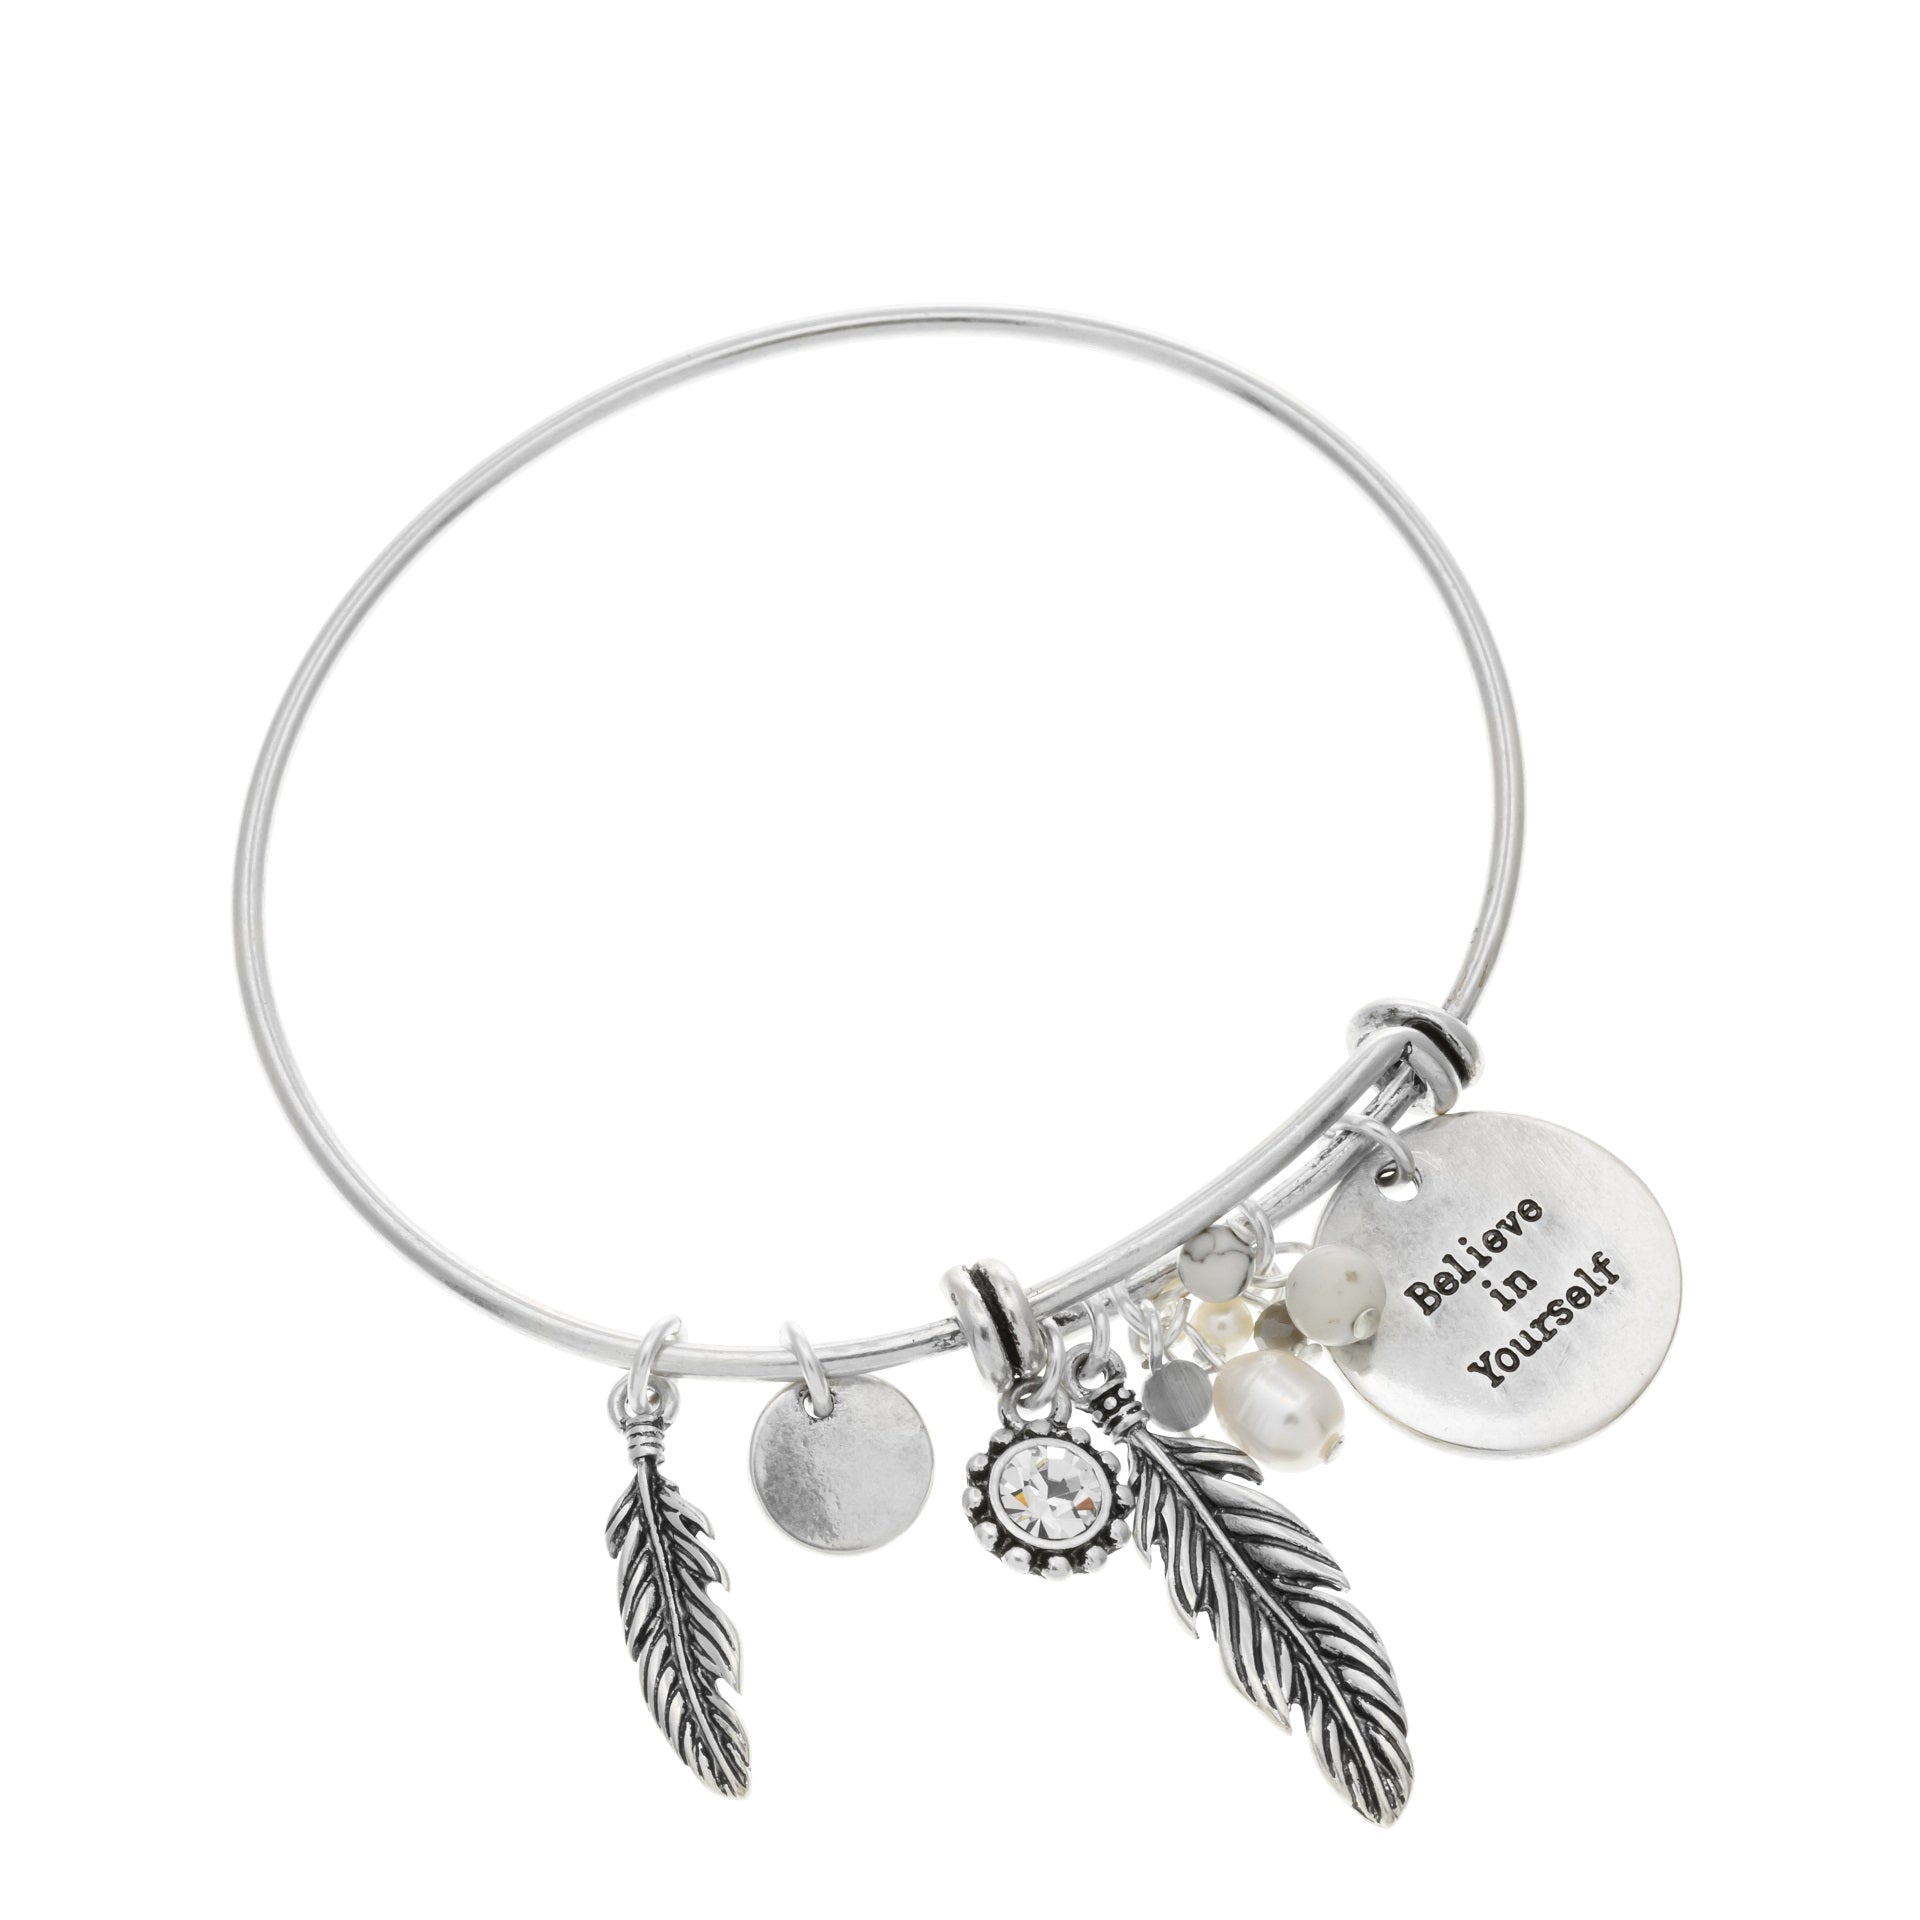 Merx fashion  jewellery bracelet with crystal stone and a believe in yourself inspirational saying